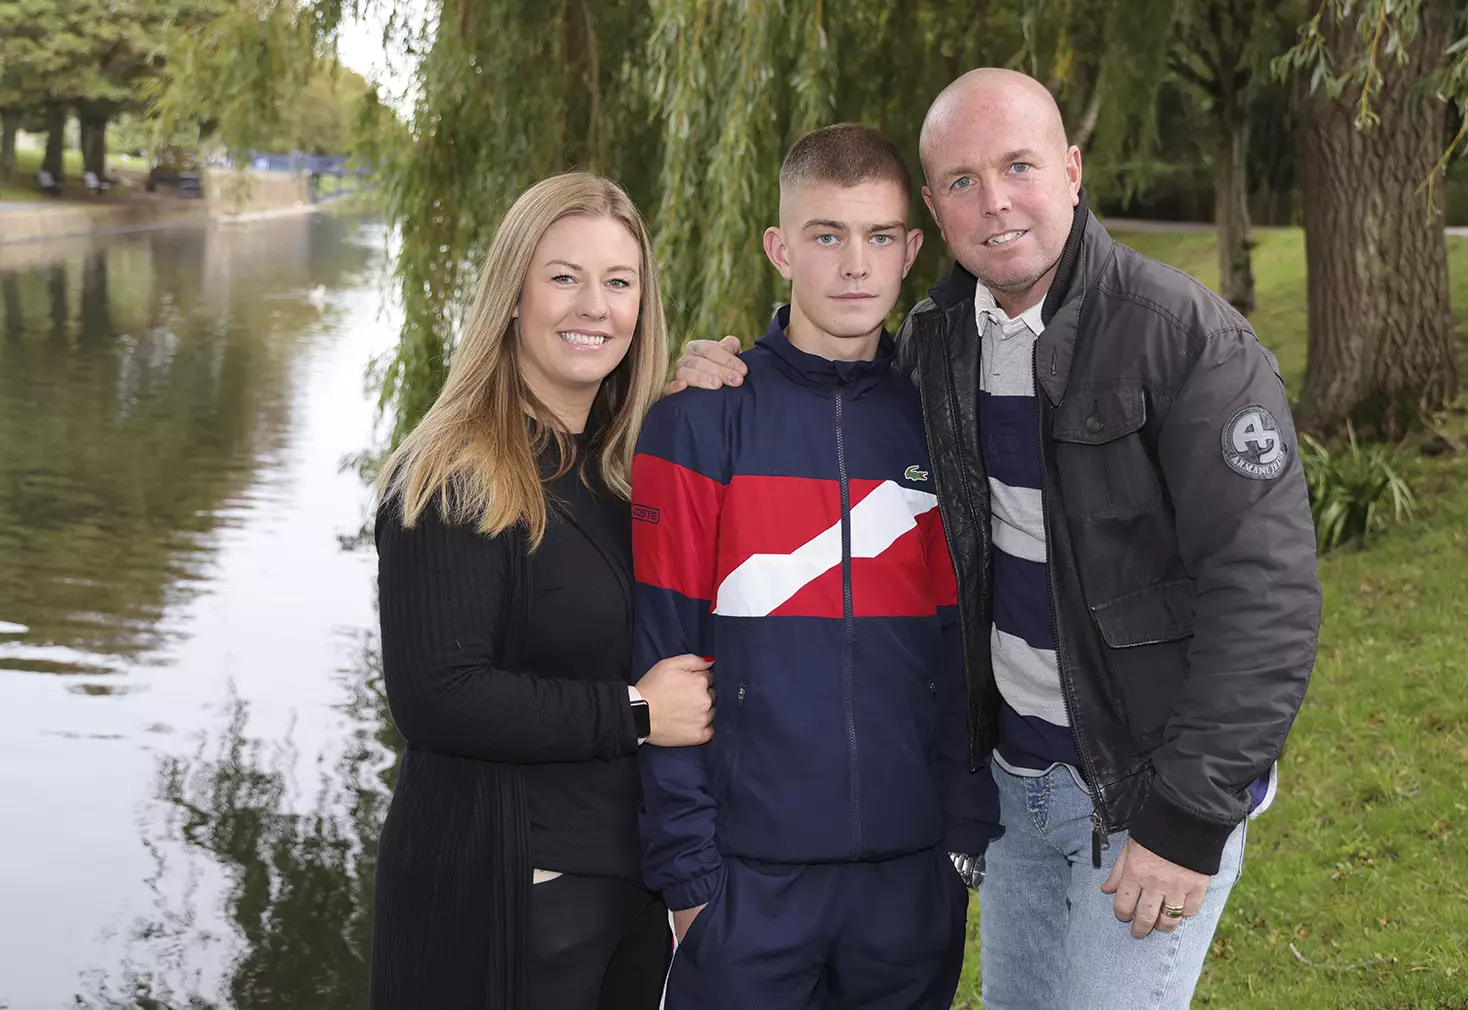 George's family are 'extremely proud' of his selfless act.